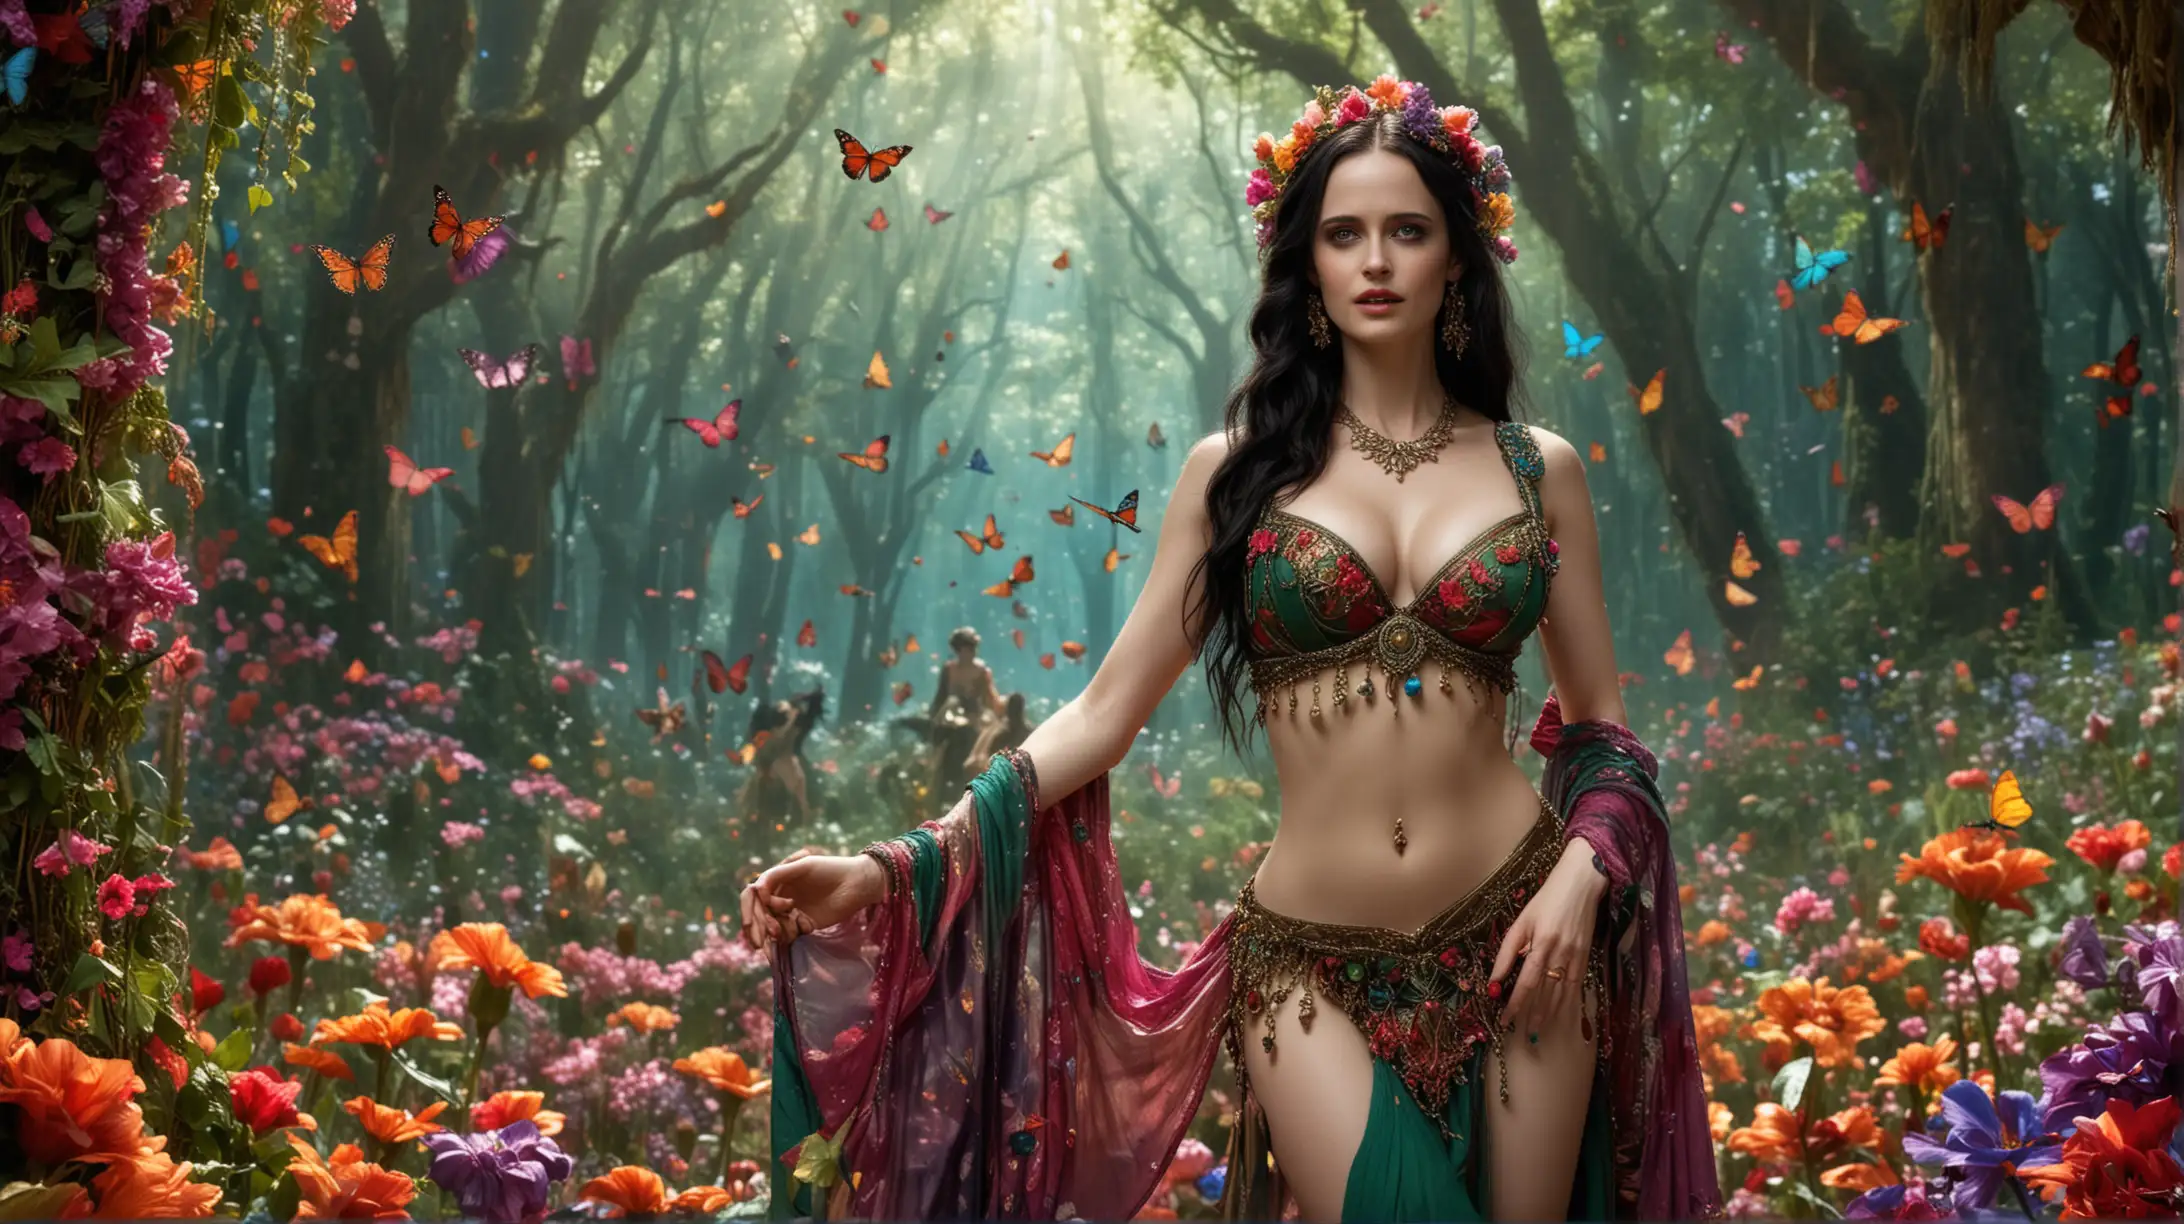 Eva Green as elf queen as Sexy Belly Dancer, big boobs, surrounded by gorgeous colorful flowers, butterflies, fantasy forest